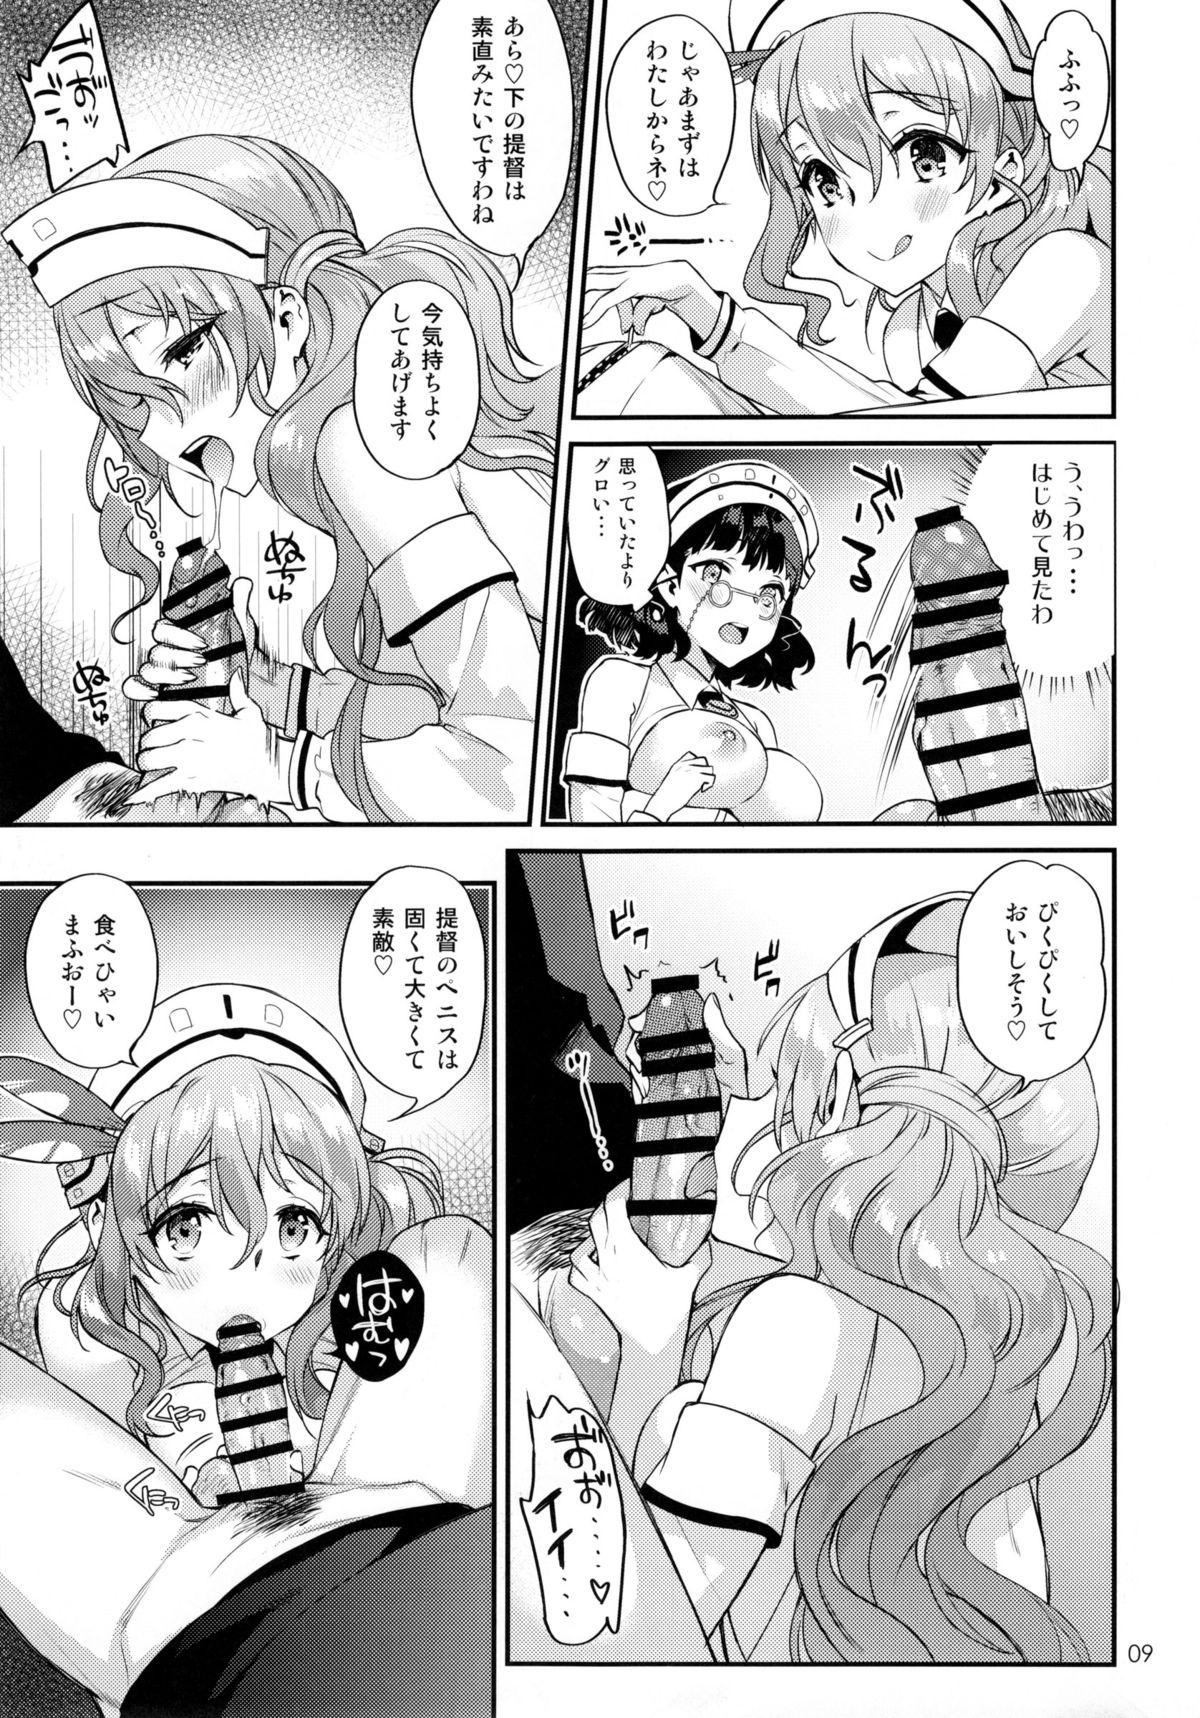 Naked Buon appetito ! - Kantai collection 3some - Page 9